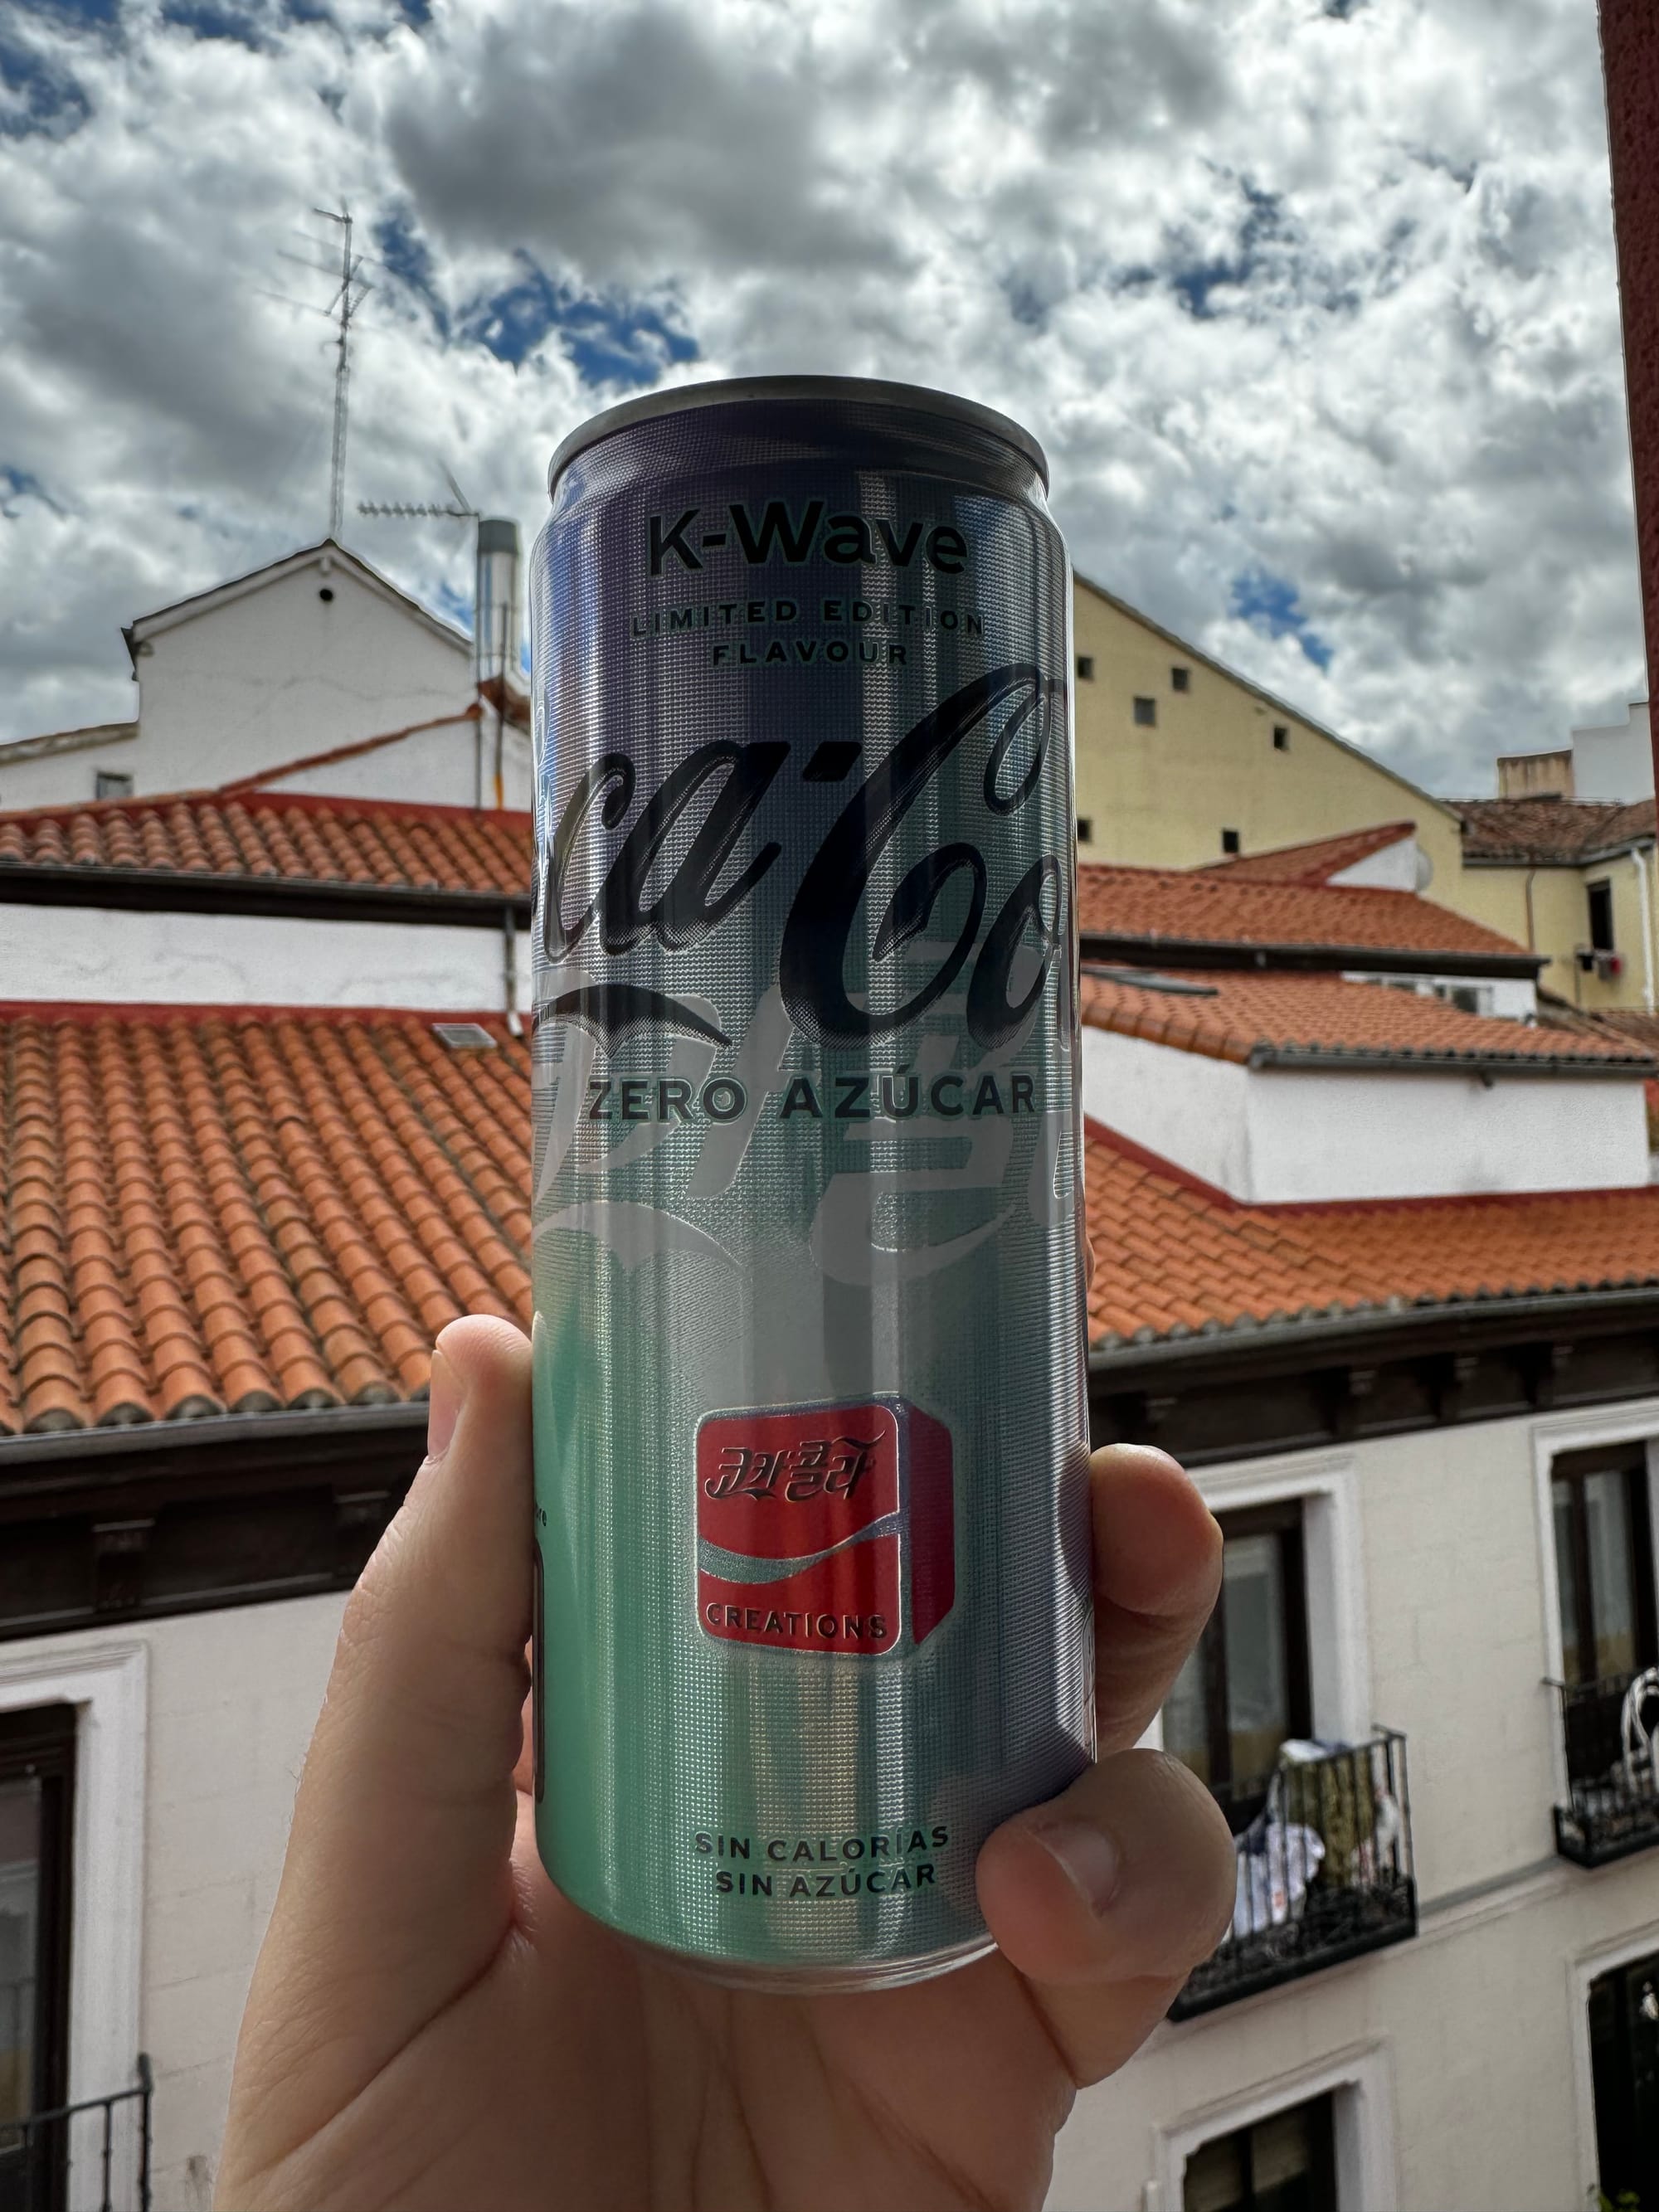 A can of Coca-Cola K-Wave—in Spanish!